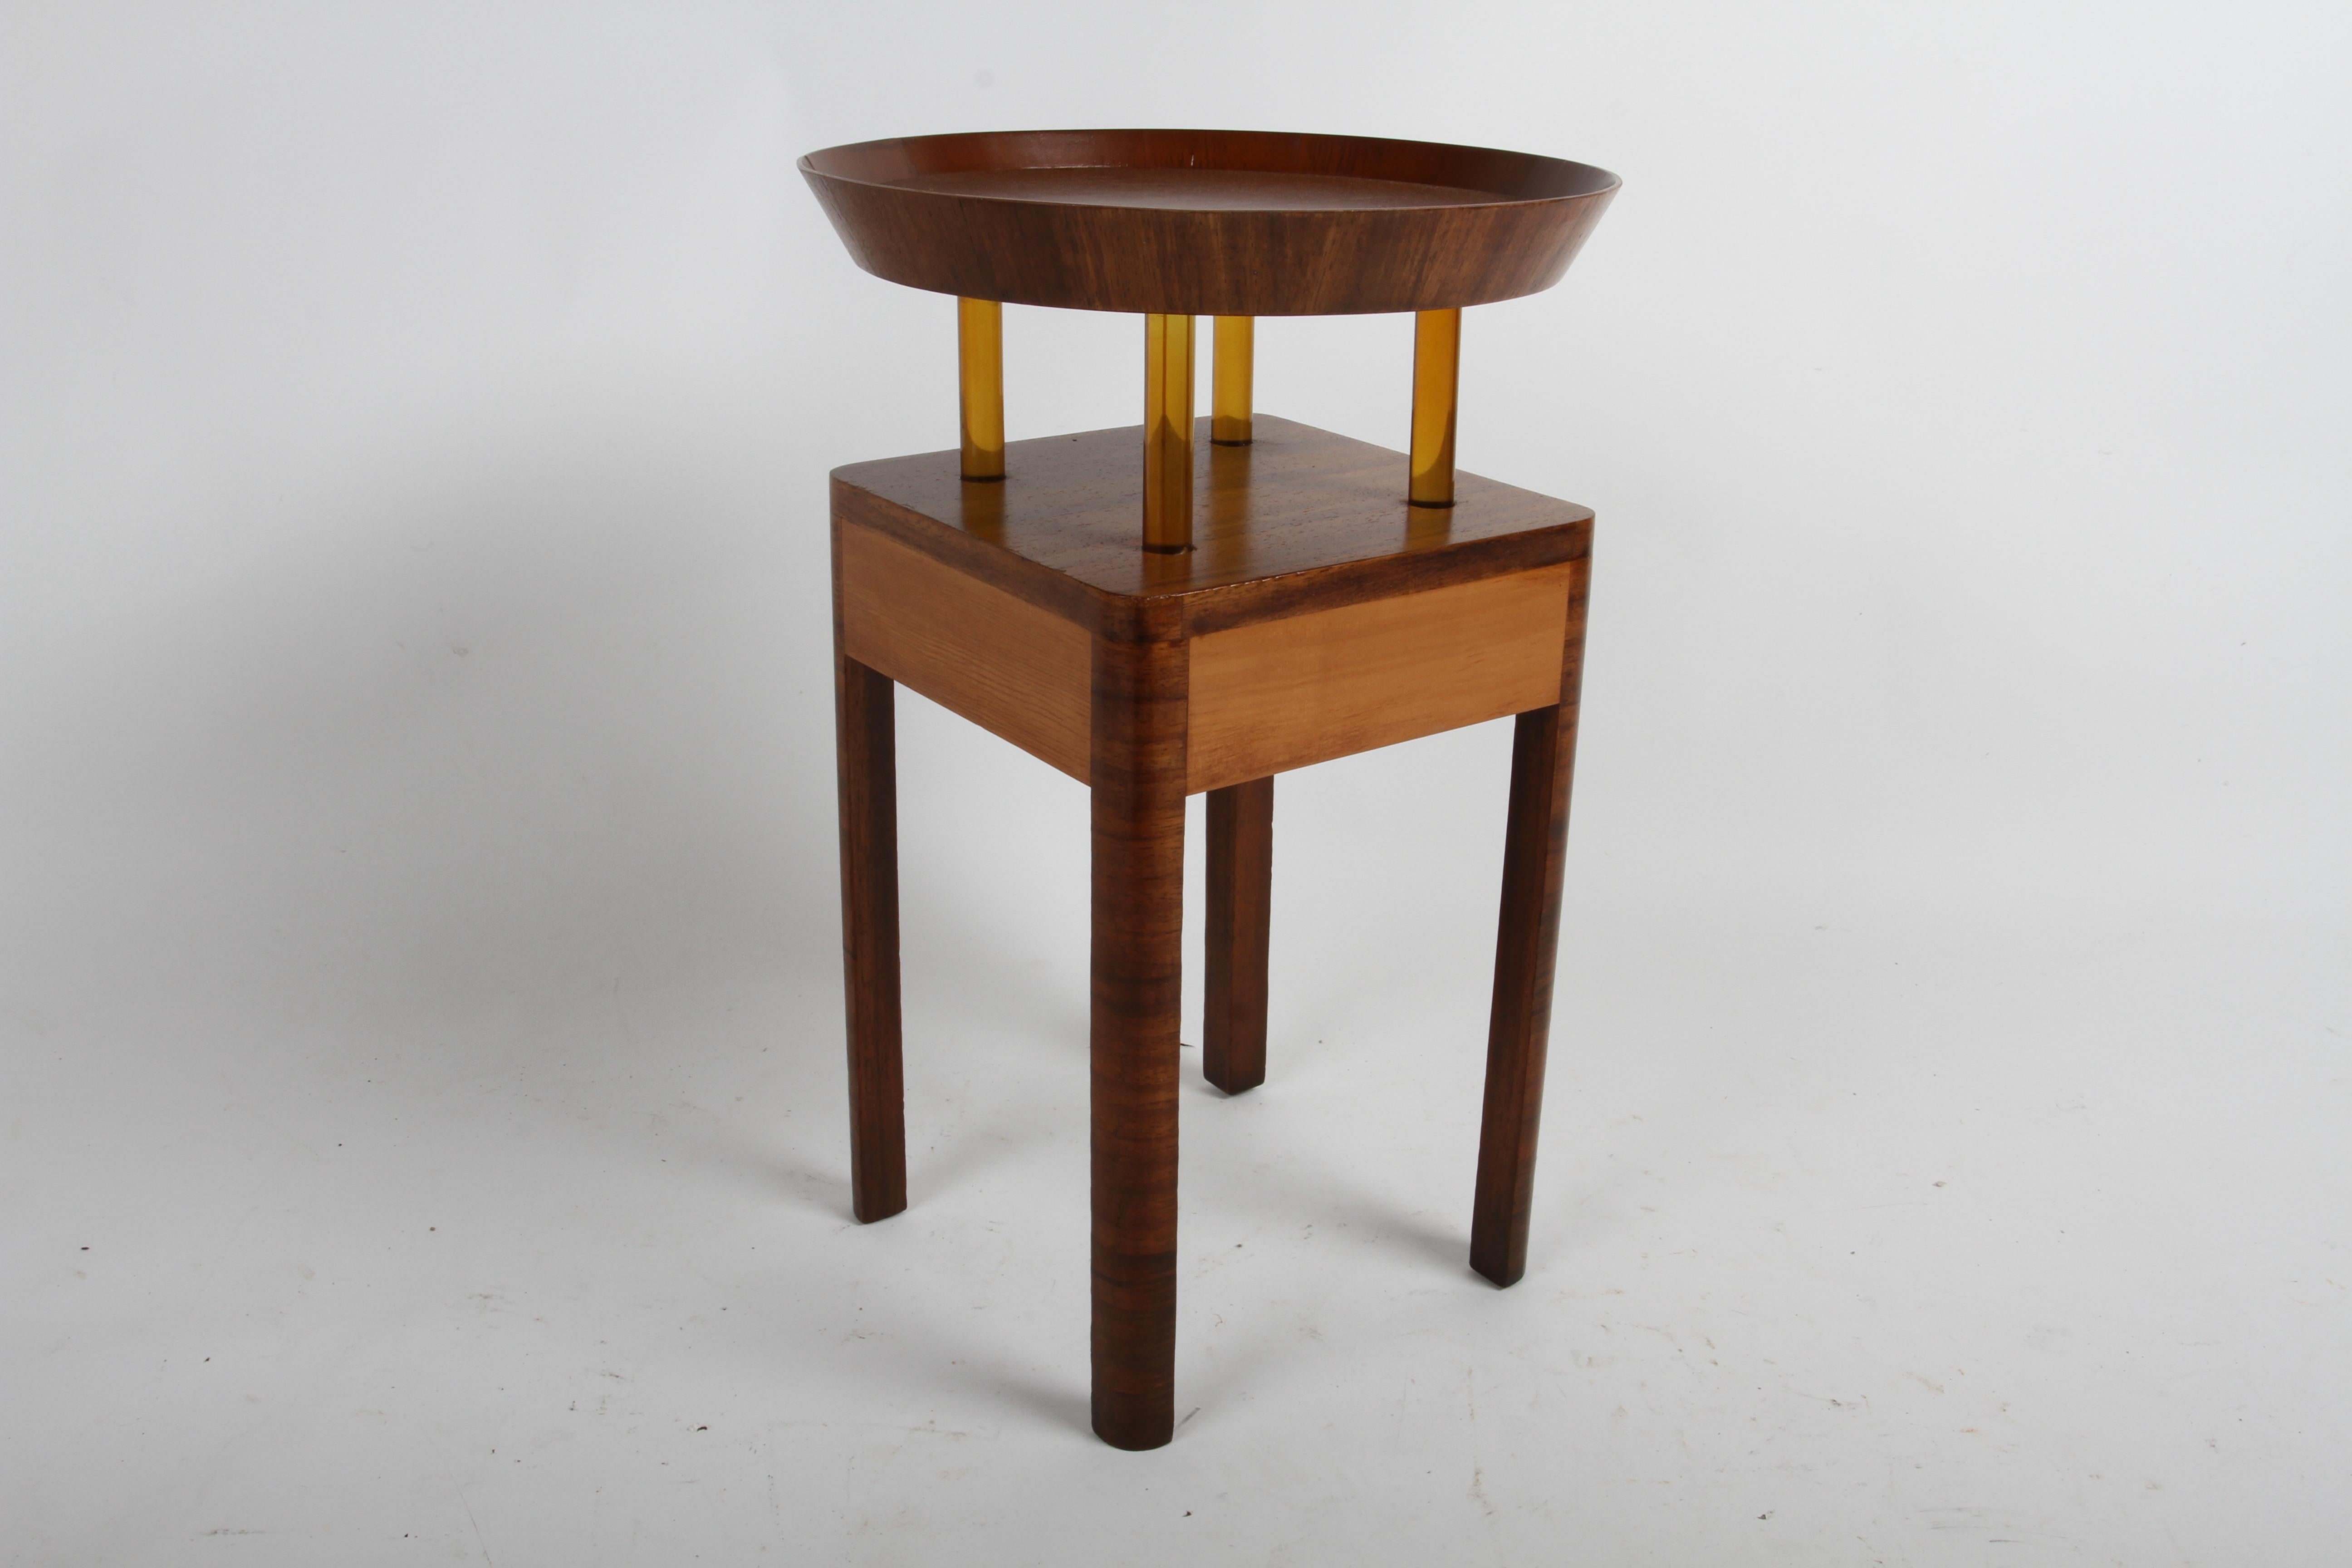 Rare Pair of 1940s Grosfeld House Round Tray Top End Table with Bakelite Details im Angebot 11